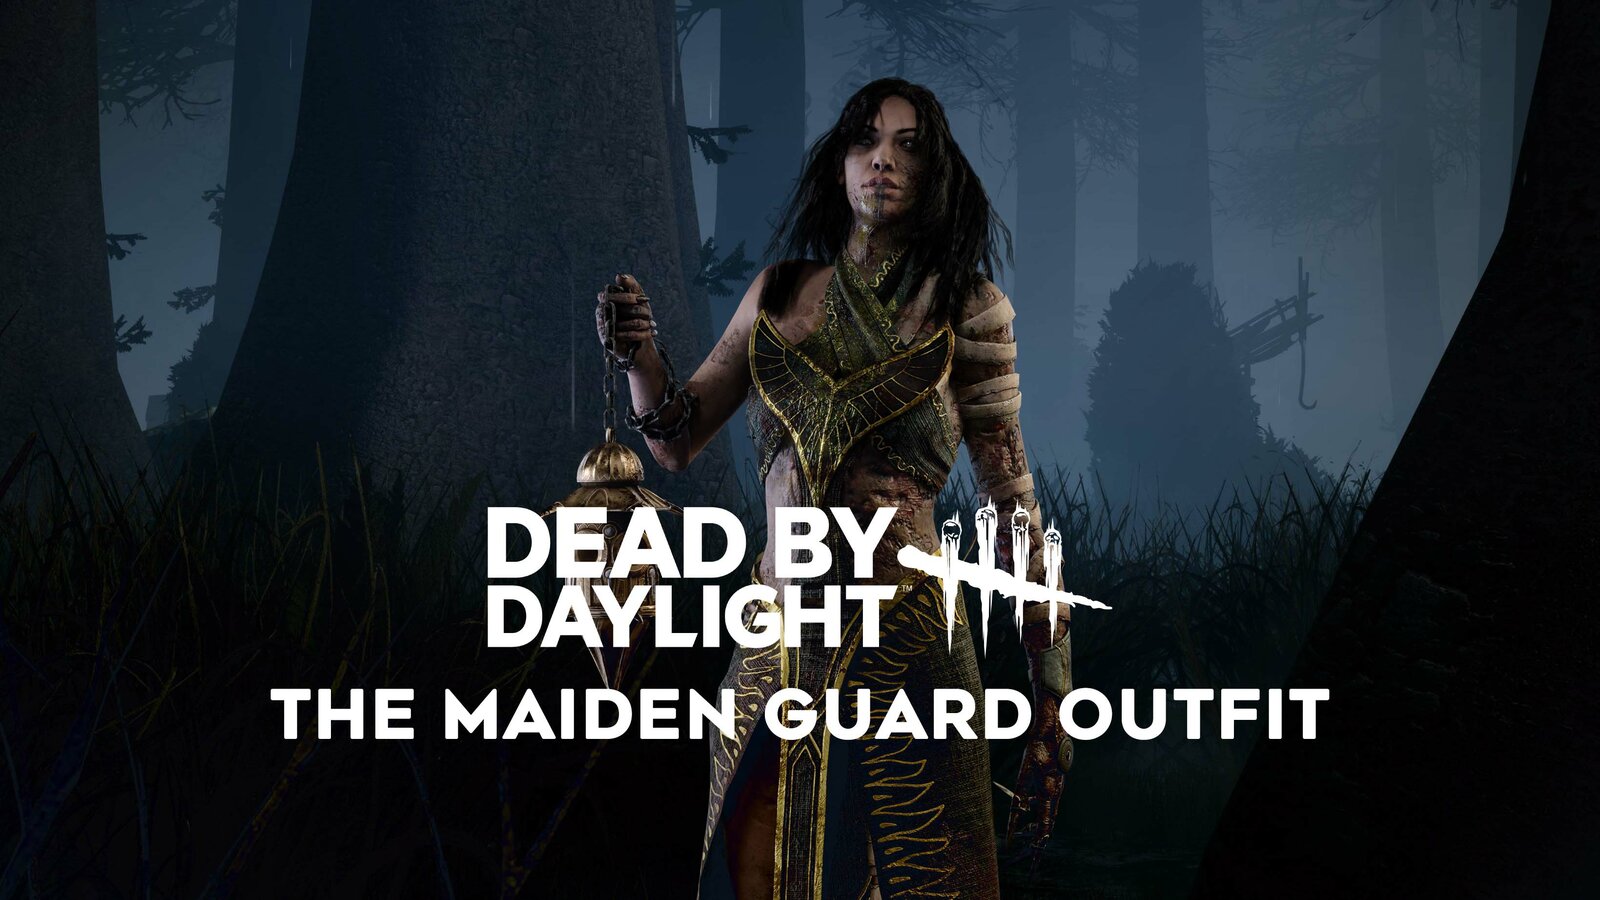 Dead by Daylight - The Plague The Maiden Guard outfit